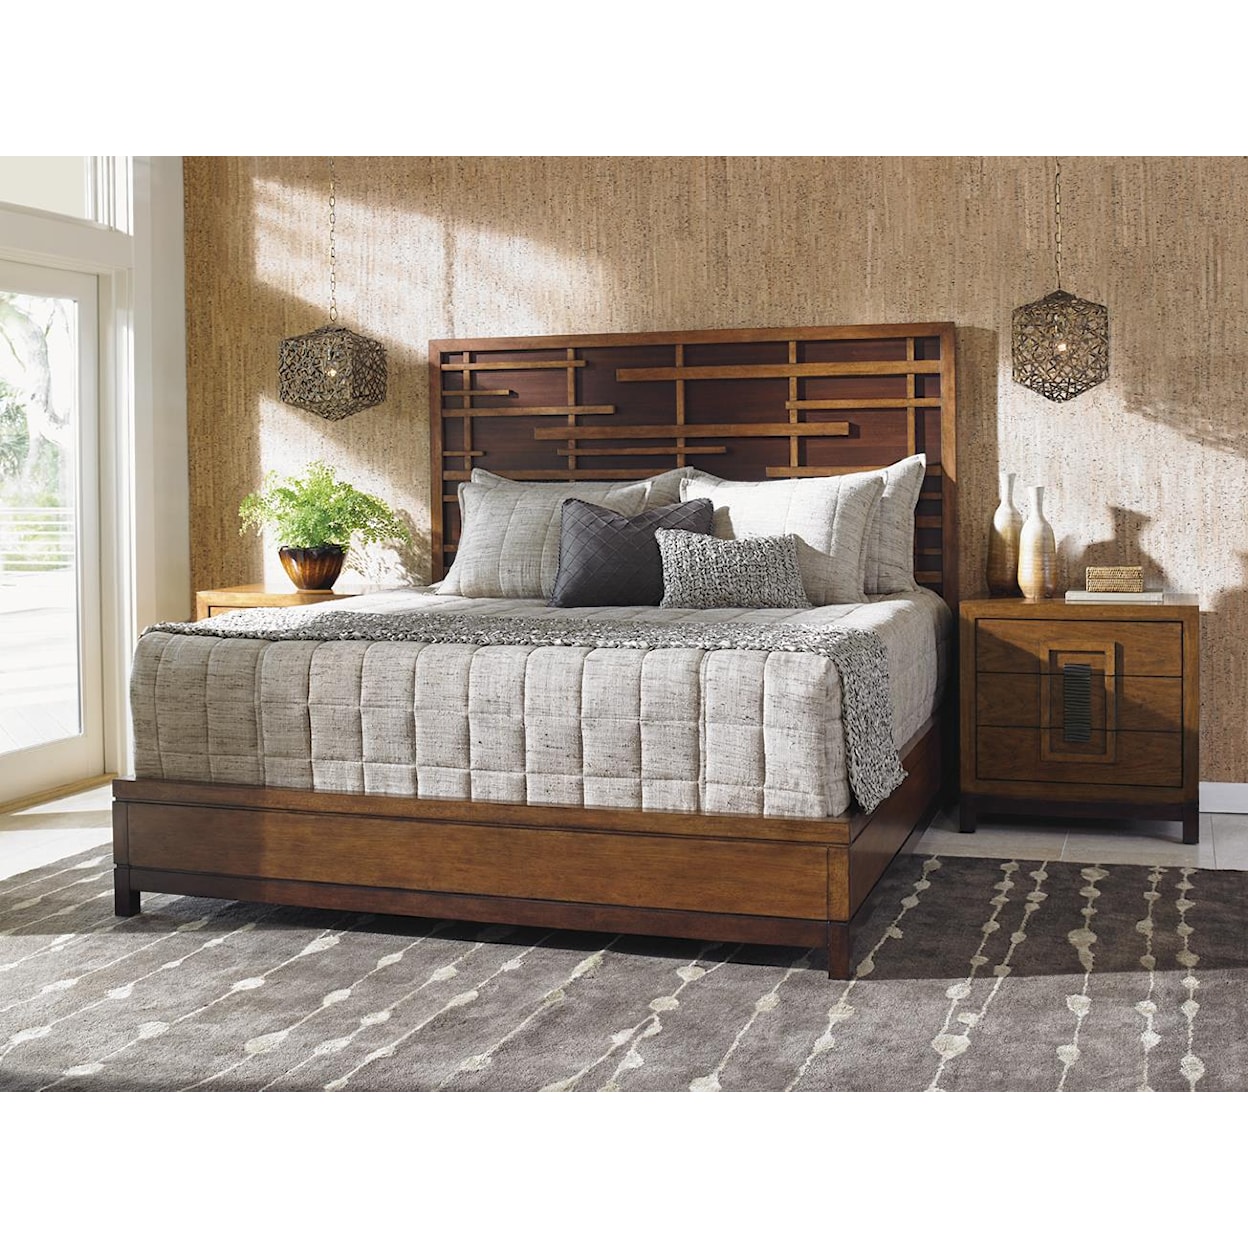 Tommy Bahama Home Island Fusion CK Bedroom Group